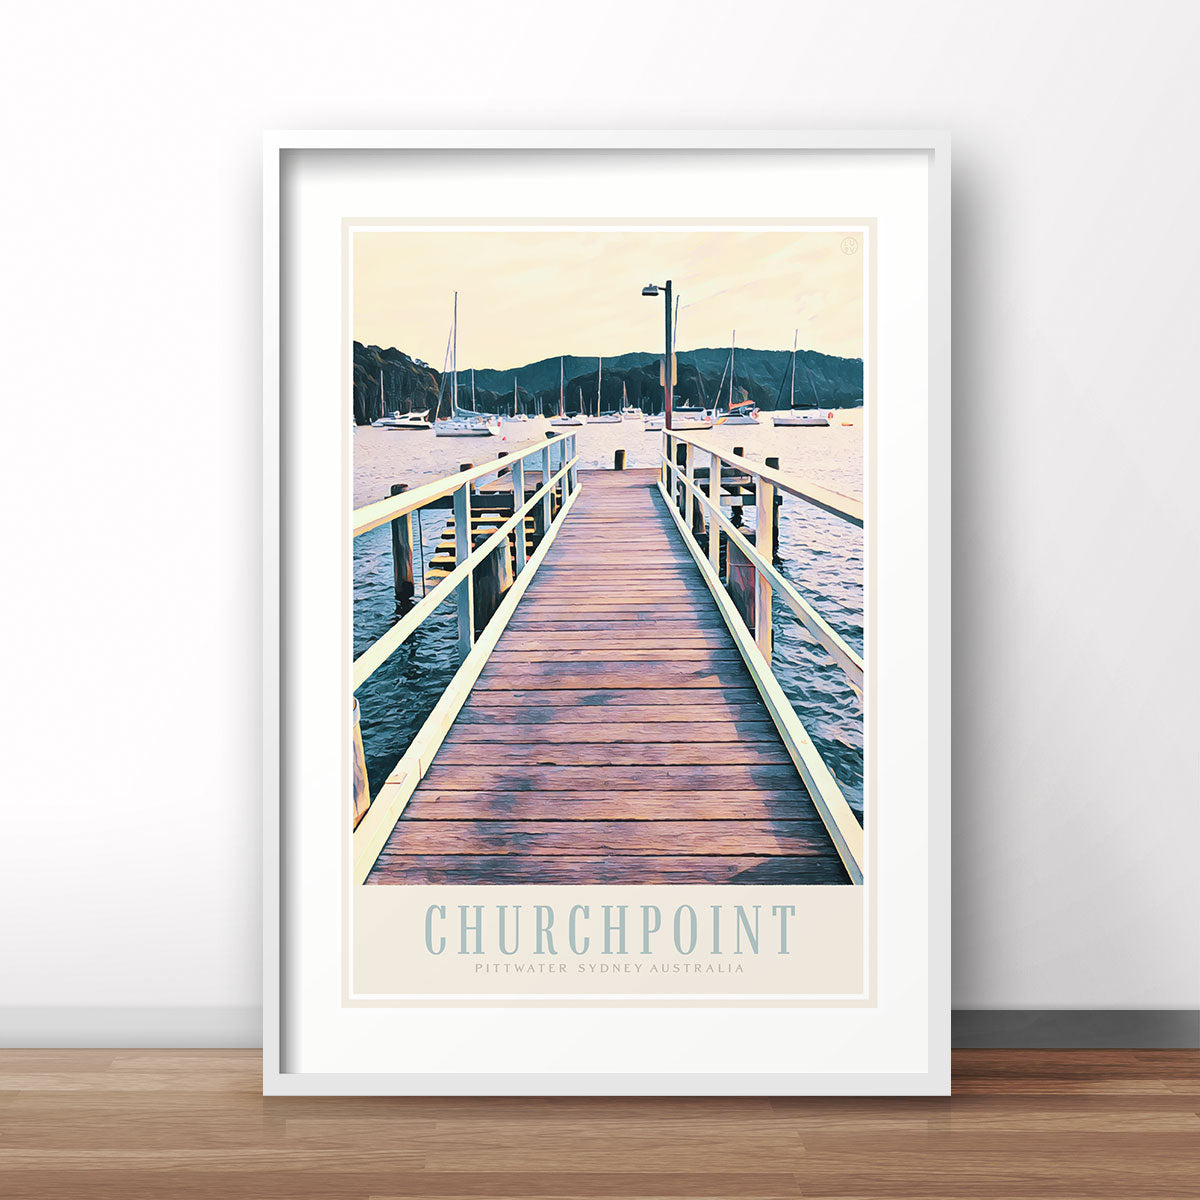 Churchpoint Sydney retro vintage travel poster print from Places We Luv